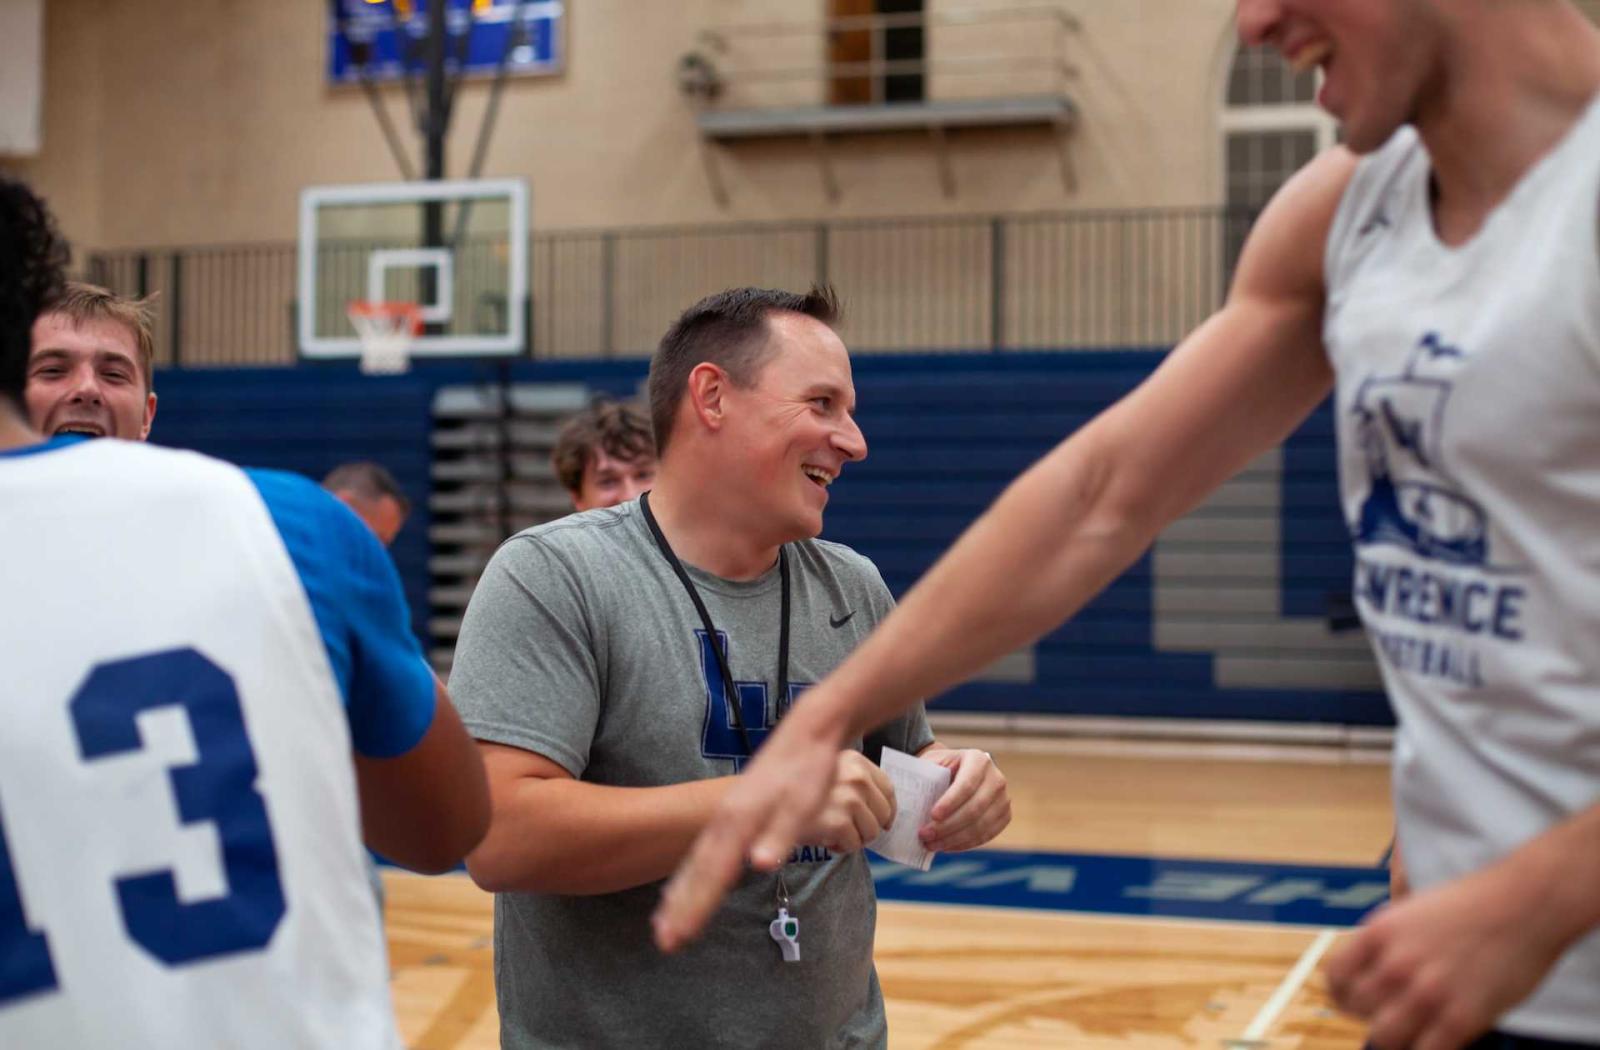 Casey Korn, the men's basketball team's new coach, talks happily to his players during practice.